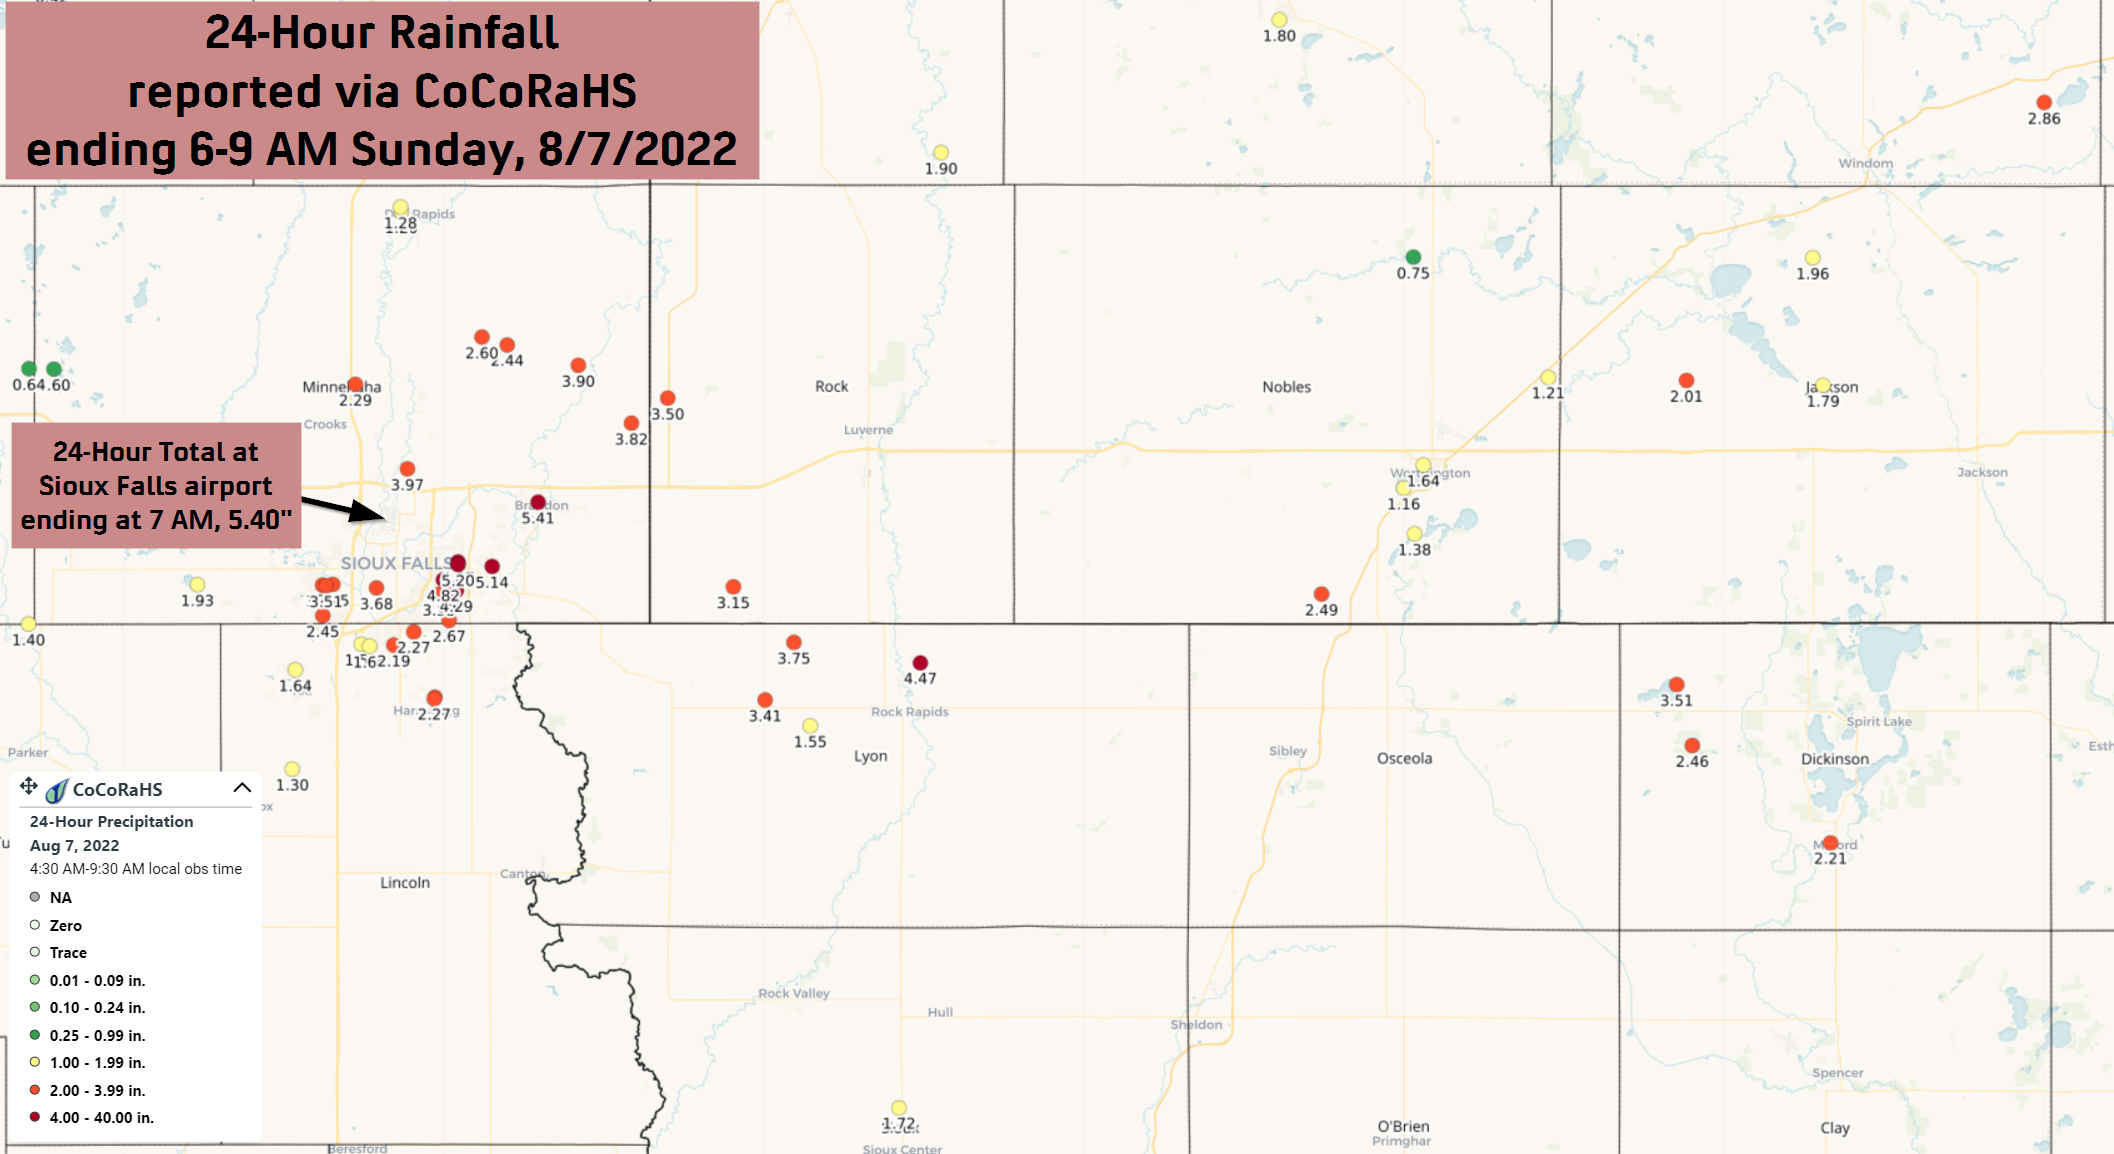 24-hour rainfall reports via CoCoRaHS reporting network. Amounts across Sioux Falls generally range from under 2 inches in southern Sioux Falls, to over 5 inches in the far north